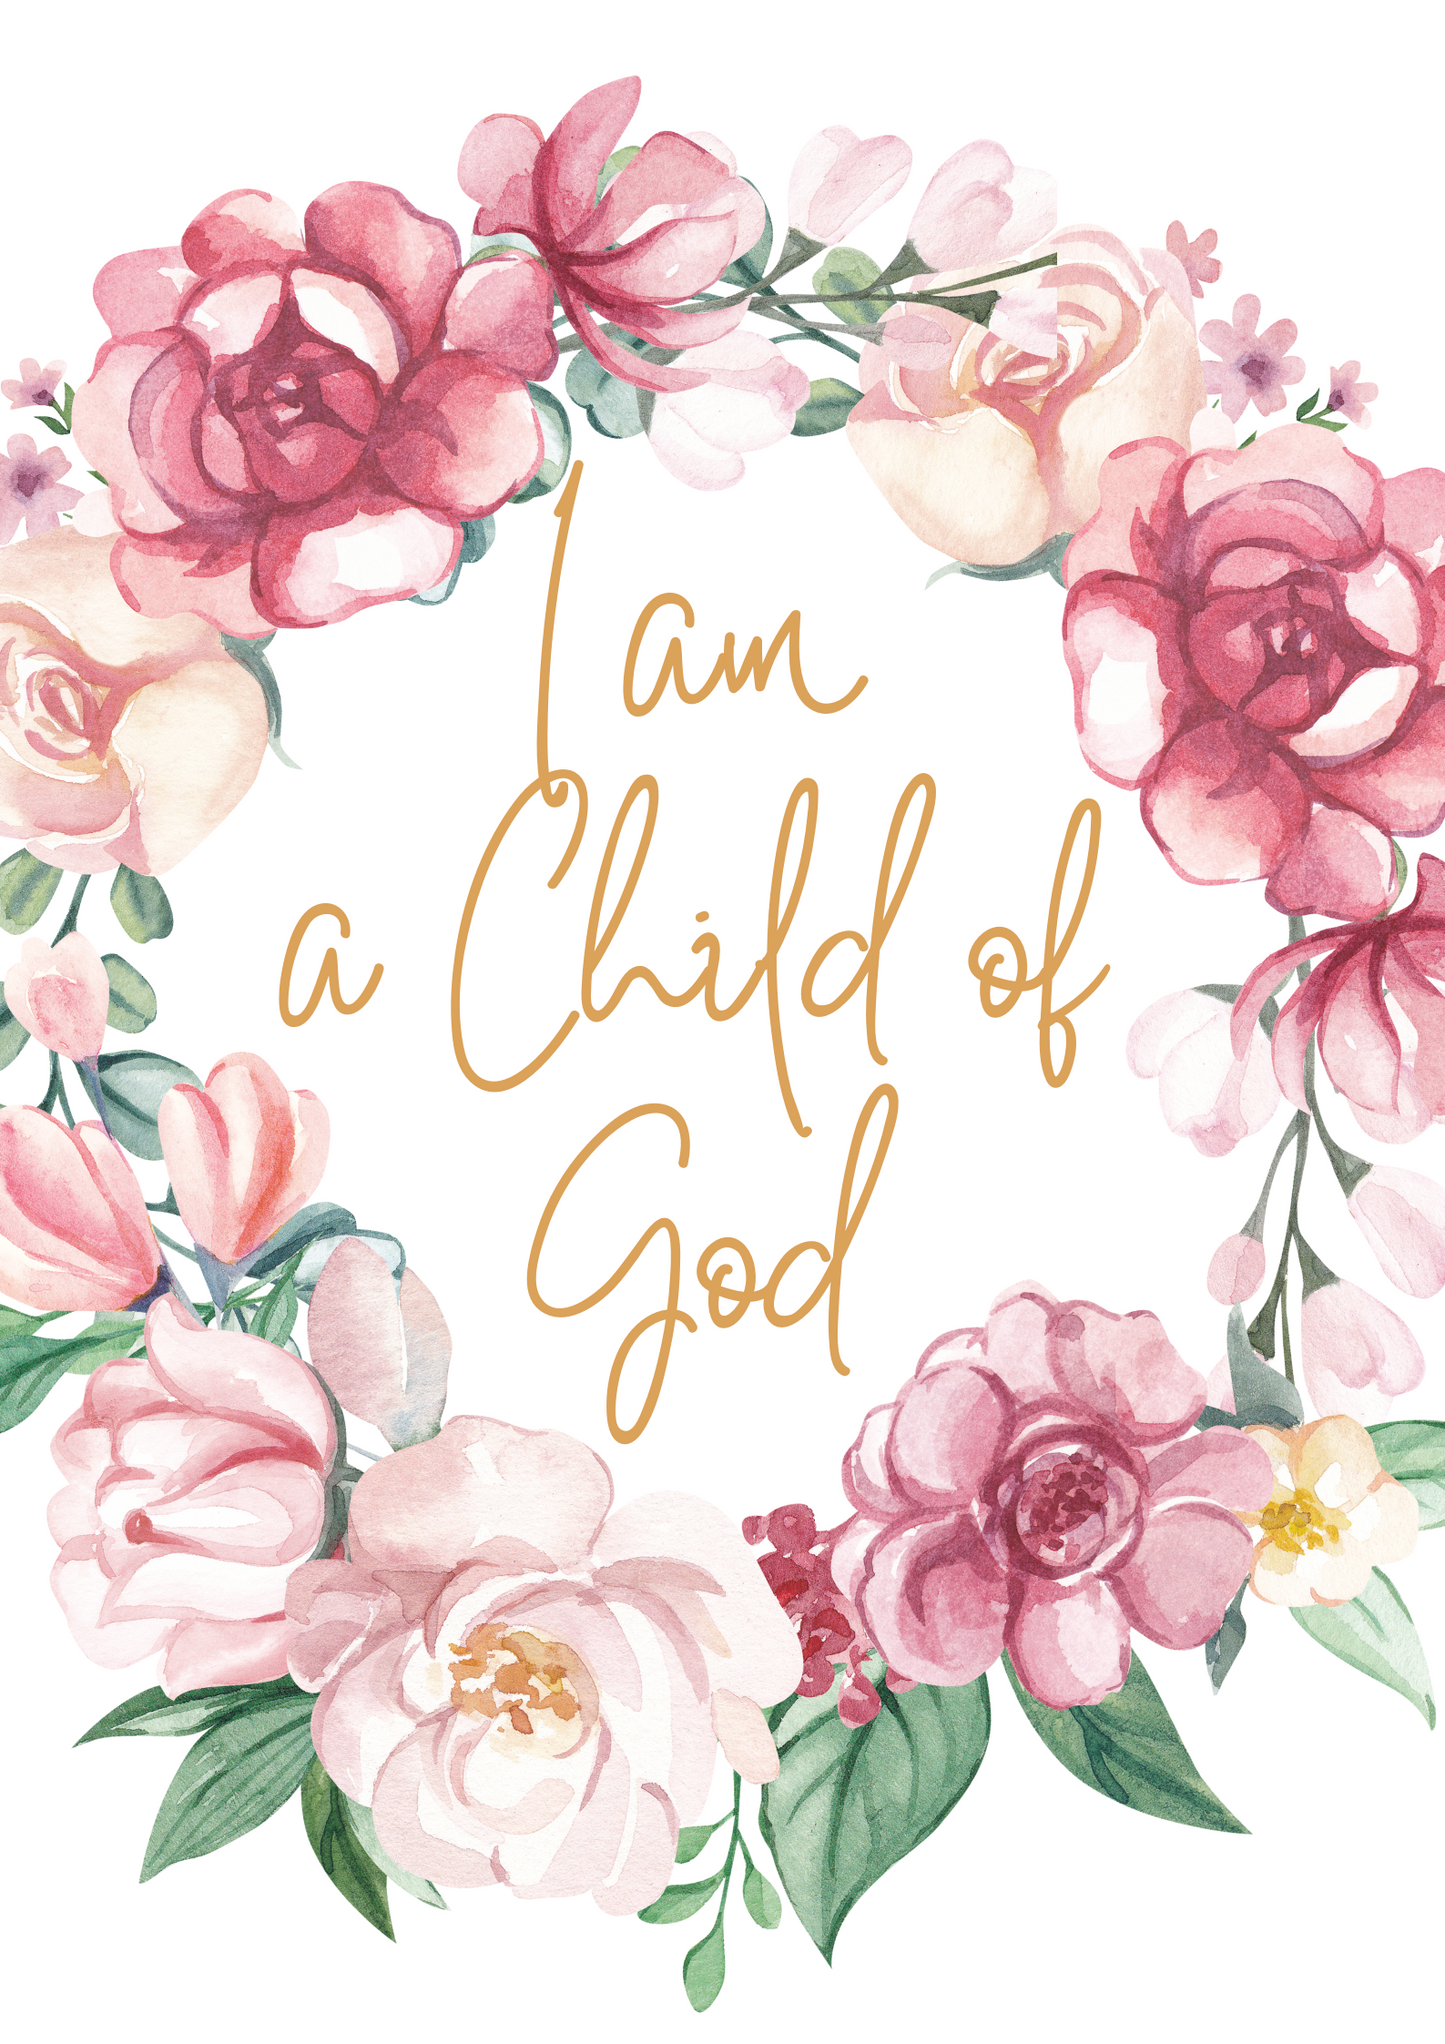 Set of 4 I am a child of God - Temple - 8 is great - CTR Pink Print Set - Baptism Gift for Girls - Girl Wall Decor